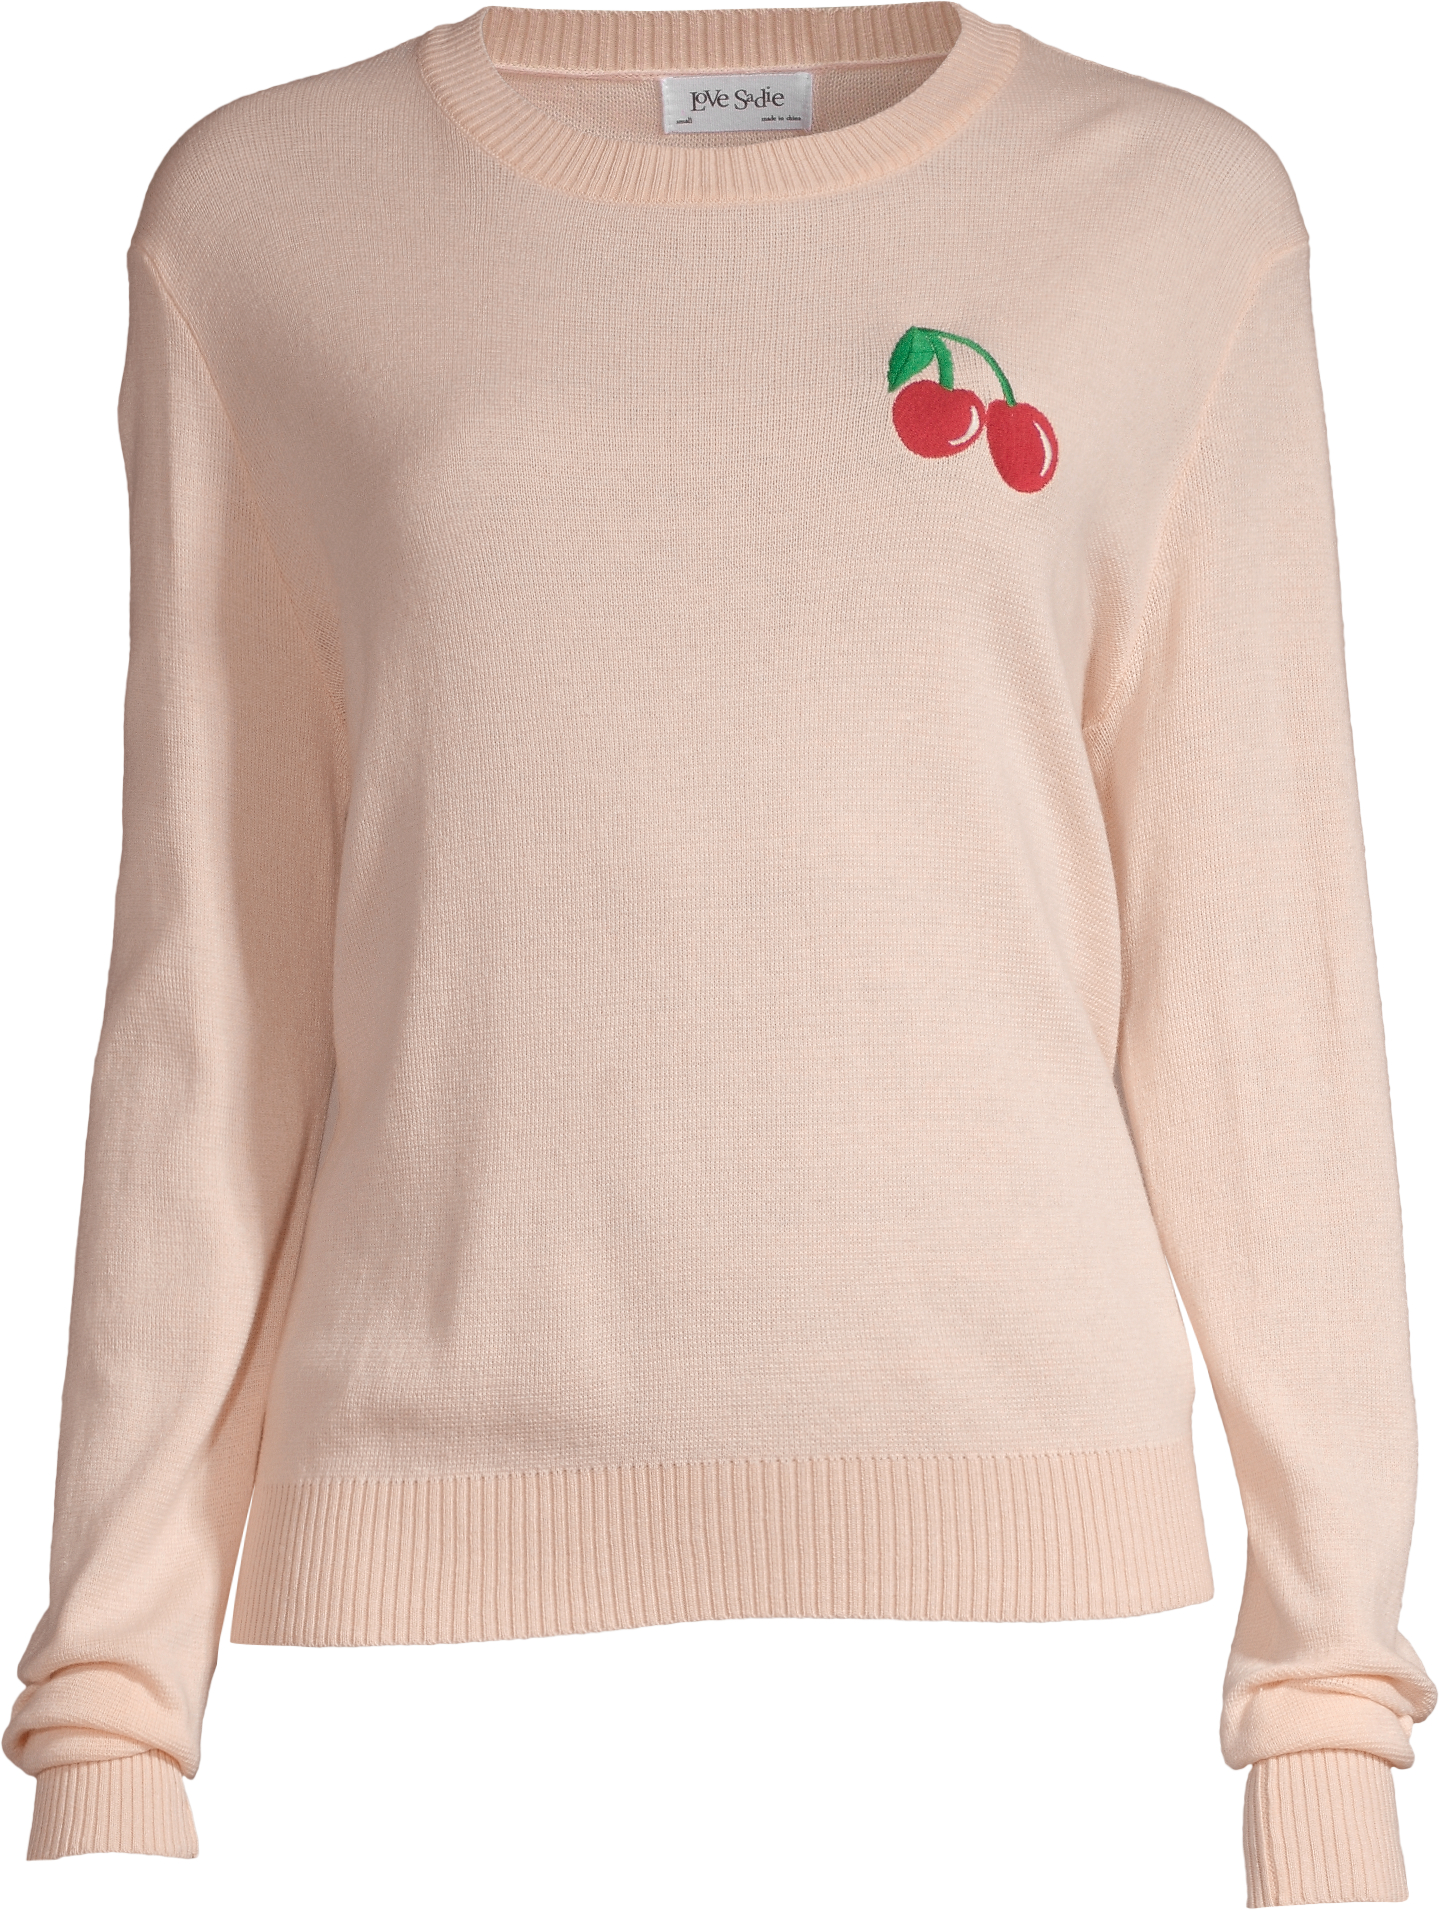 Love Sadie Women's Embroidered Sweater - image 7 of 7